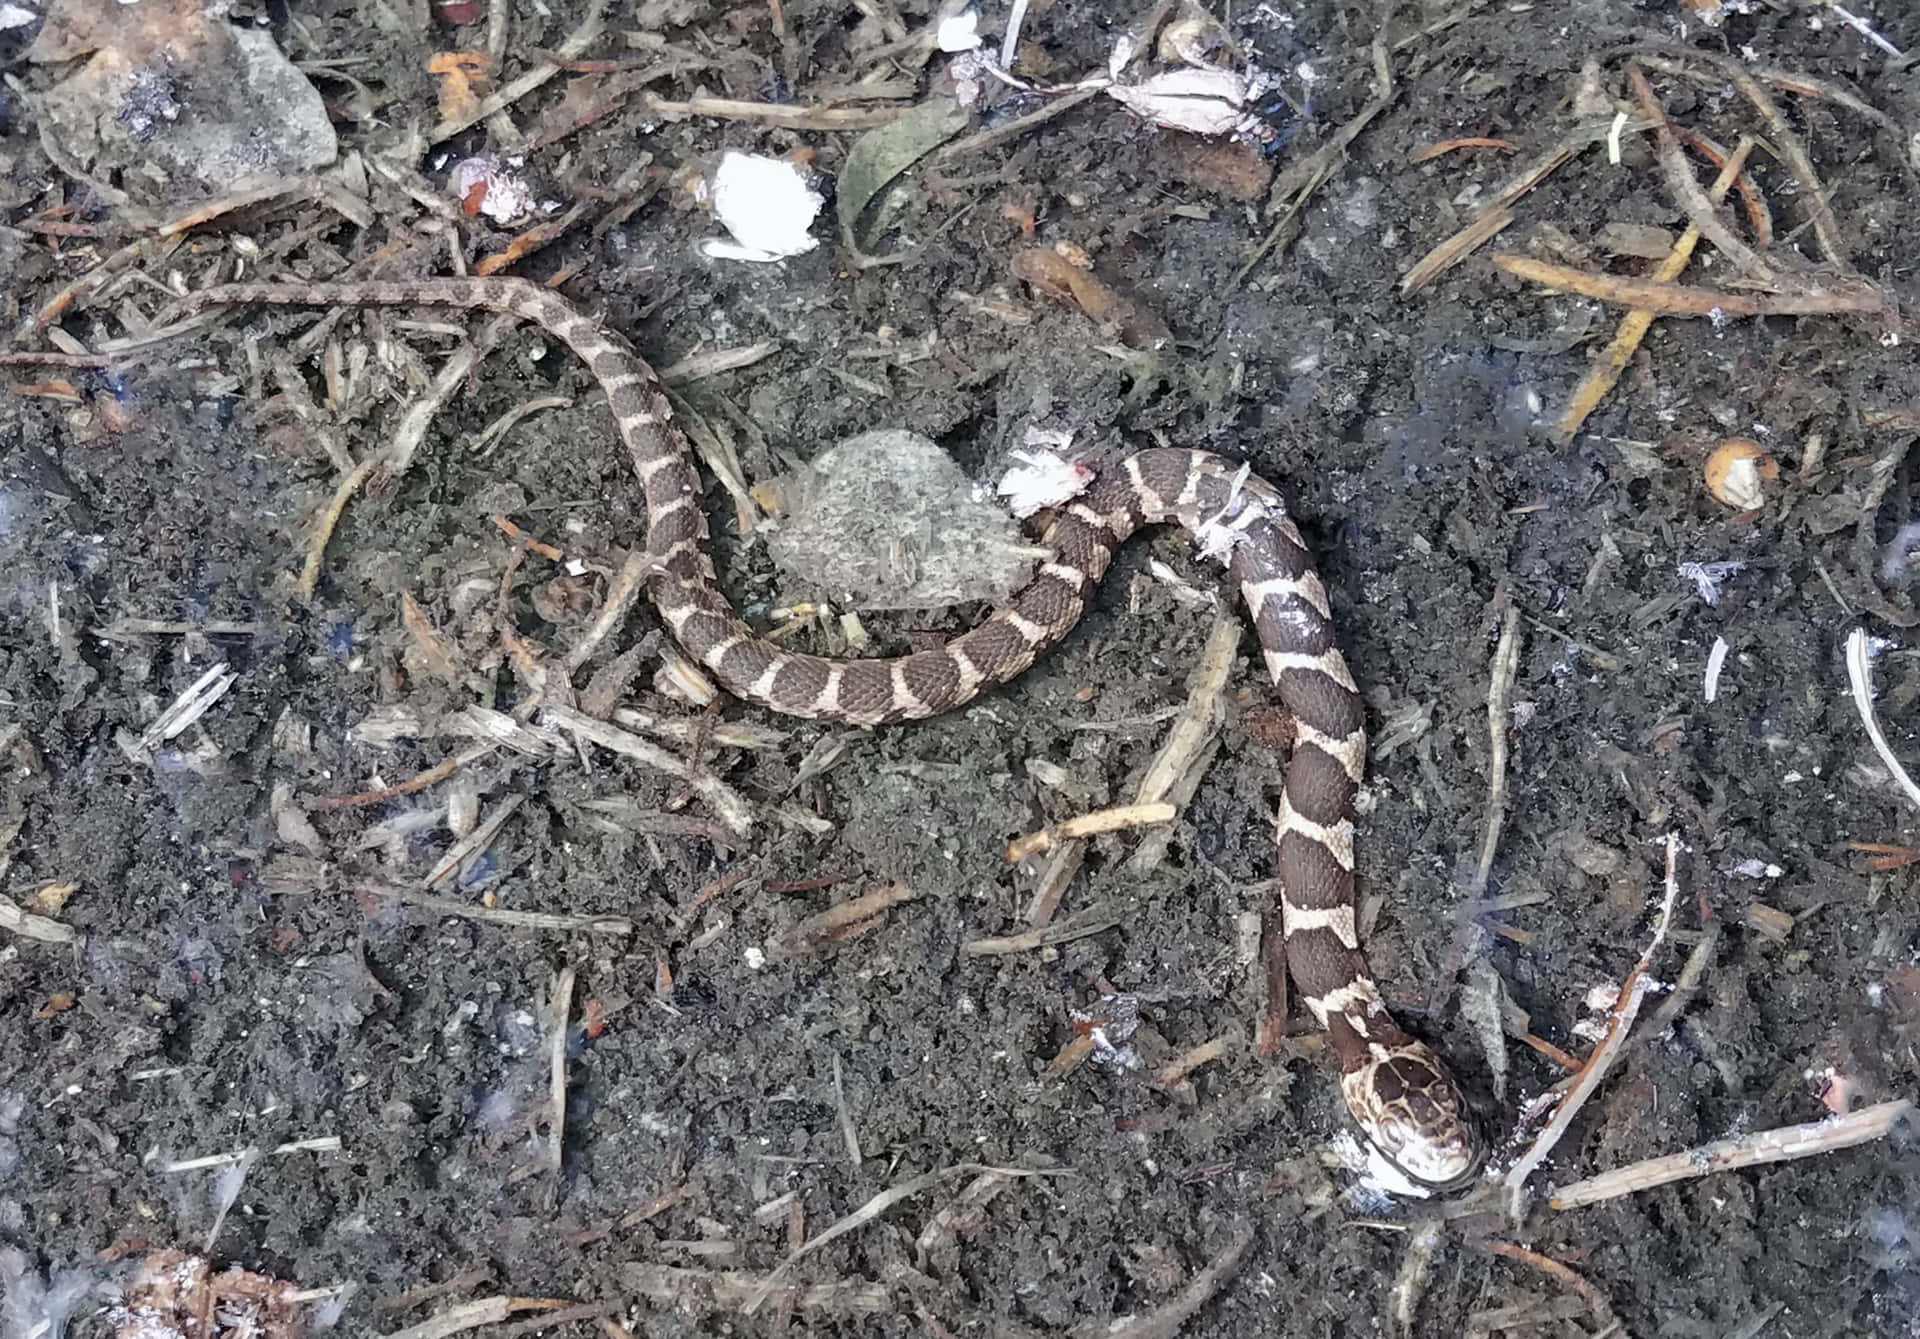 Copperhead snake in a defensive stance